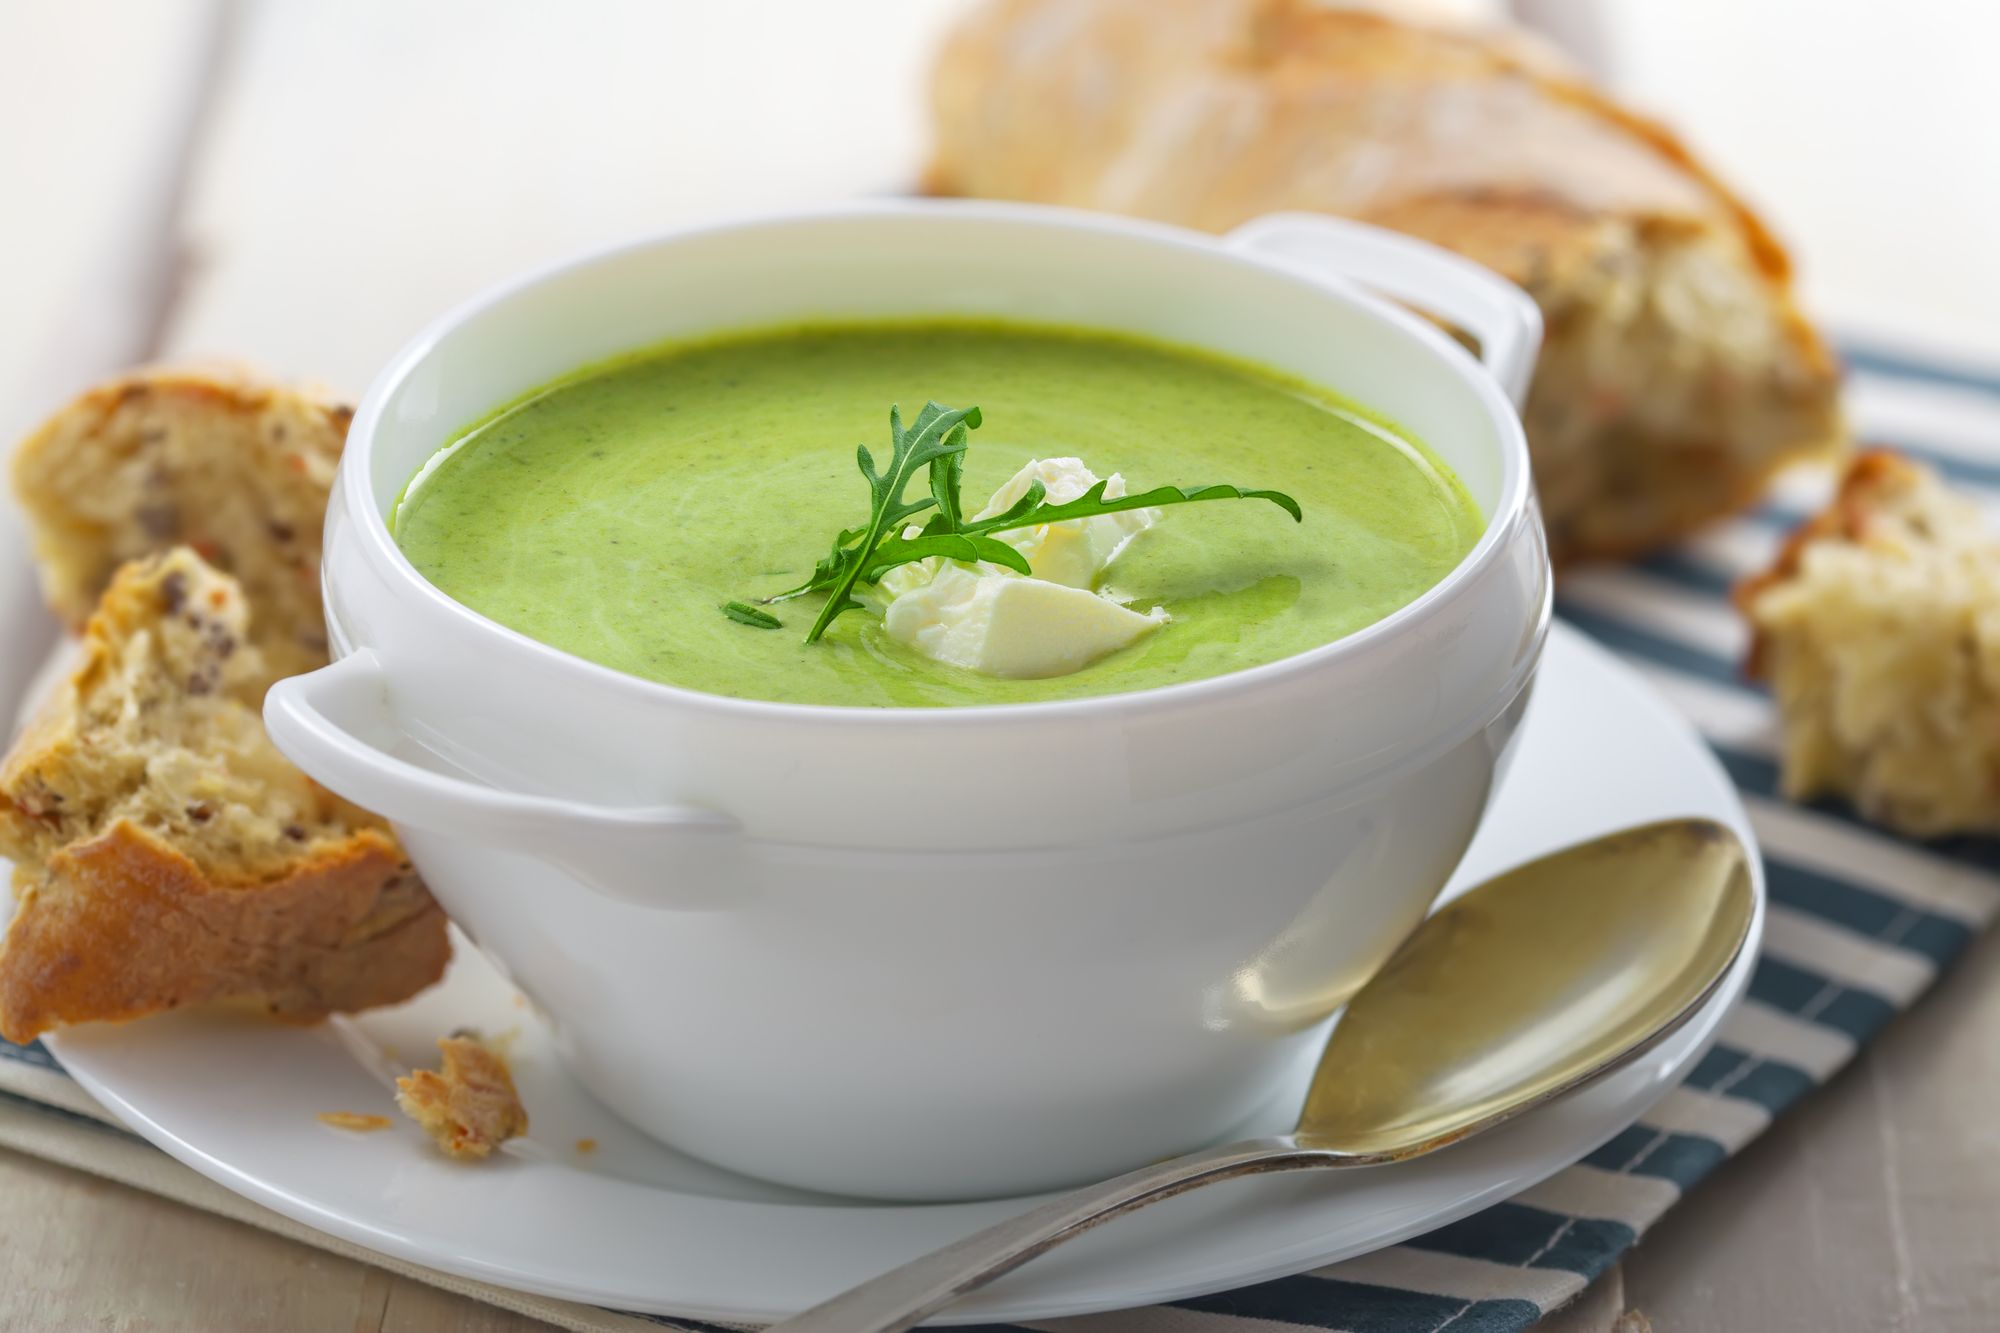 Pea, Broccoli and Minted Ricotta Soup